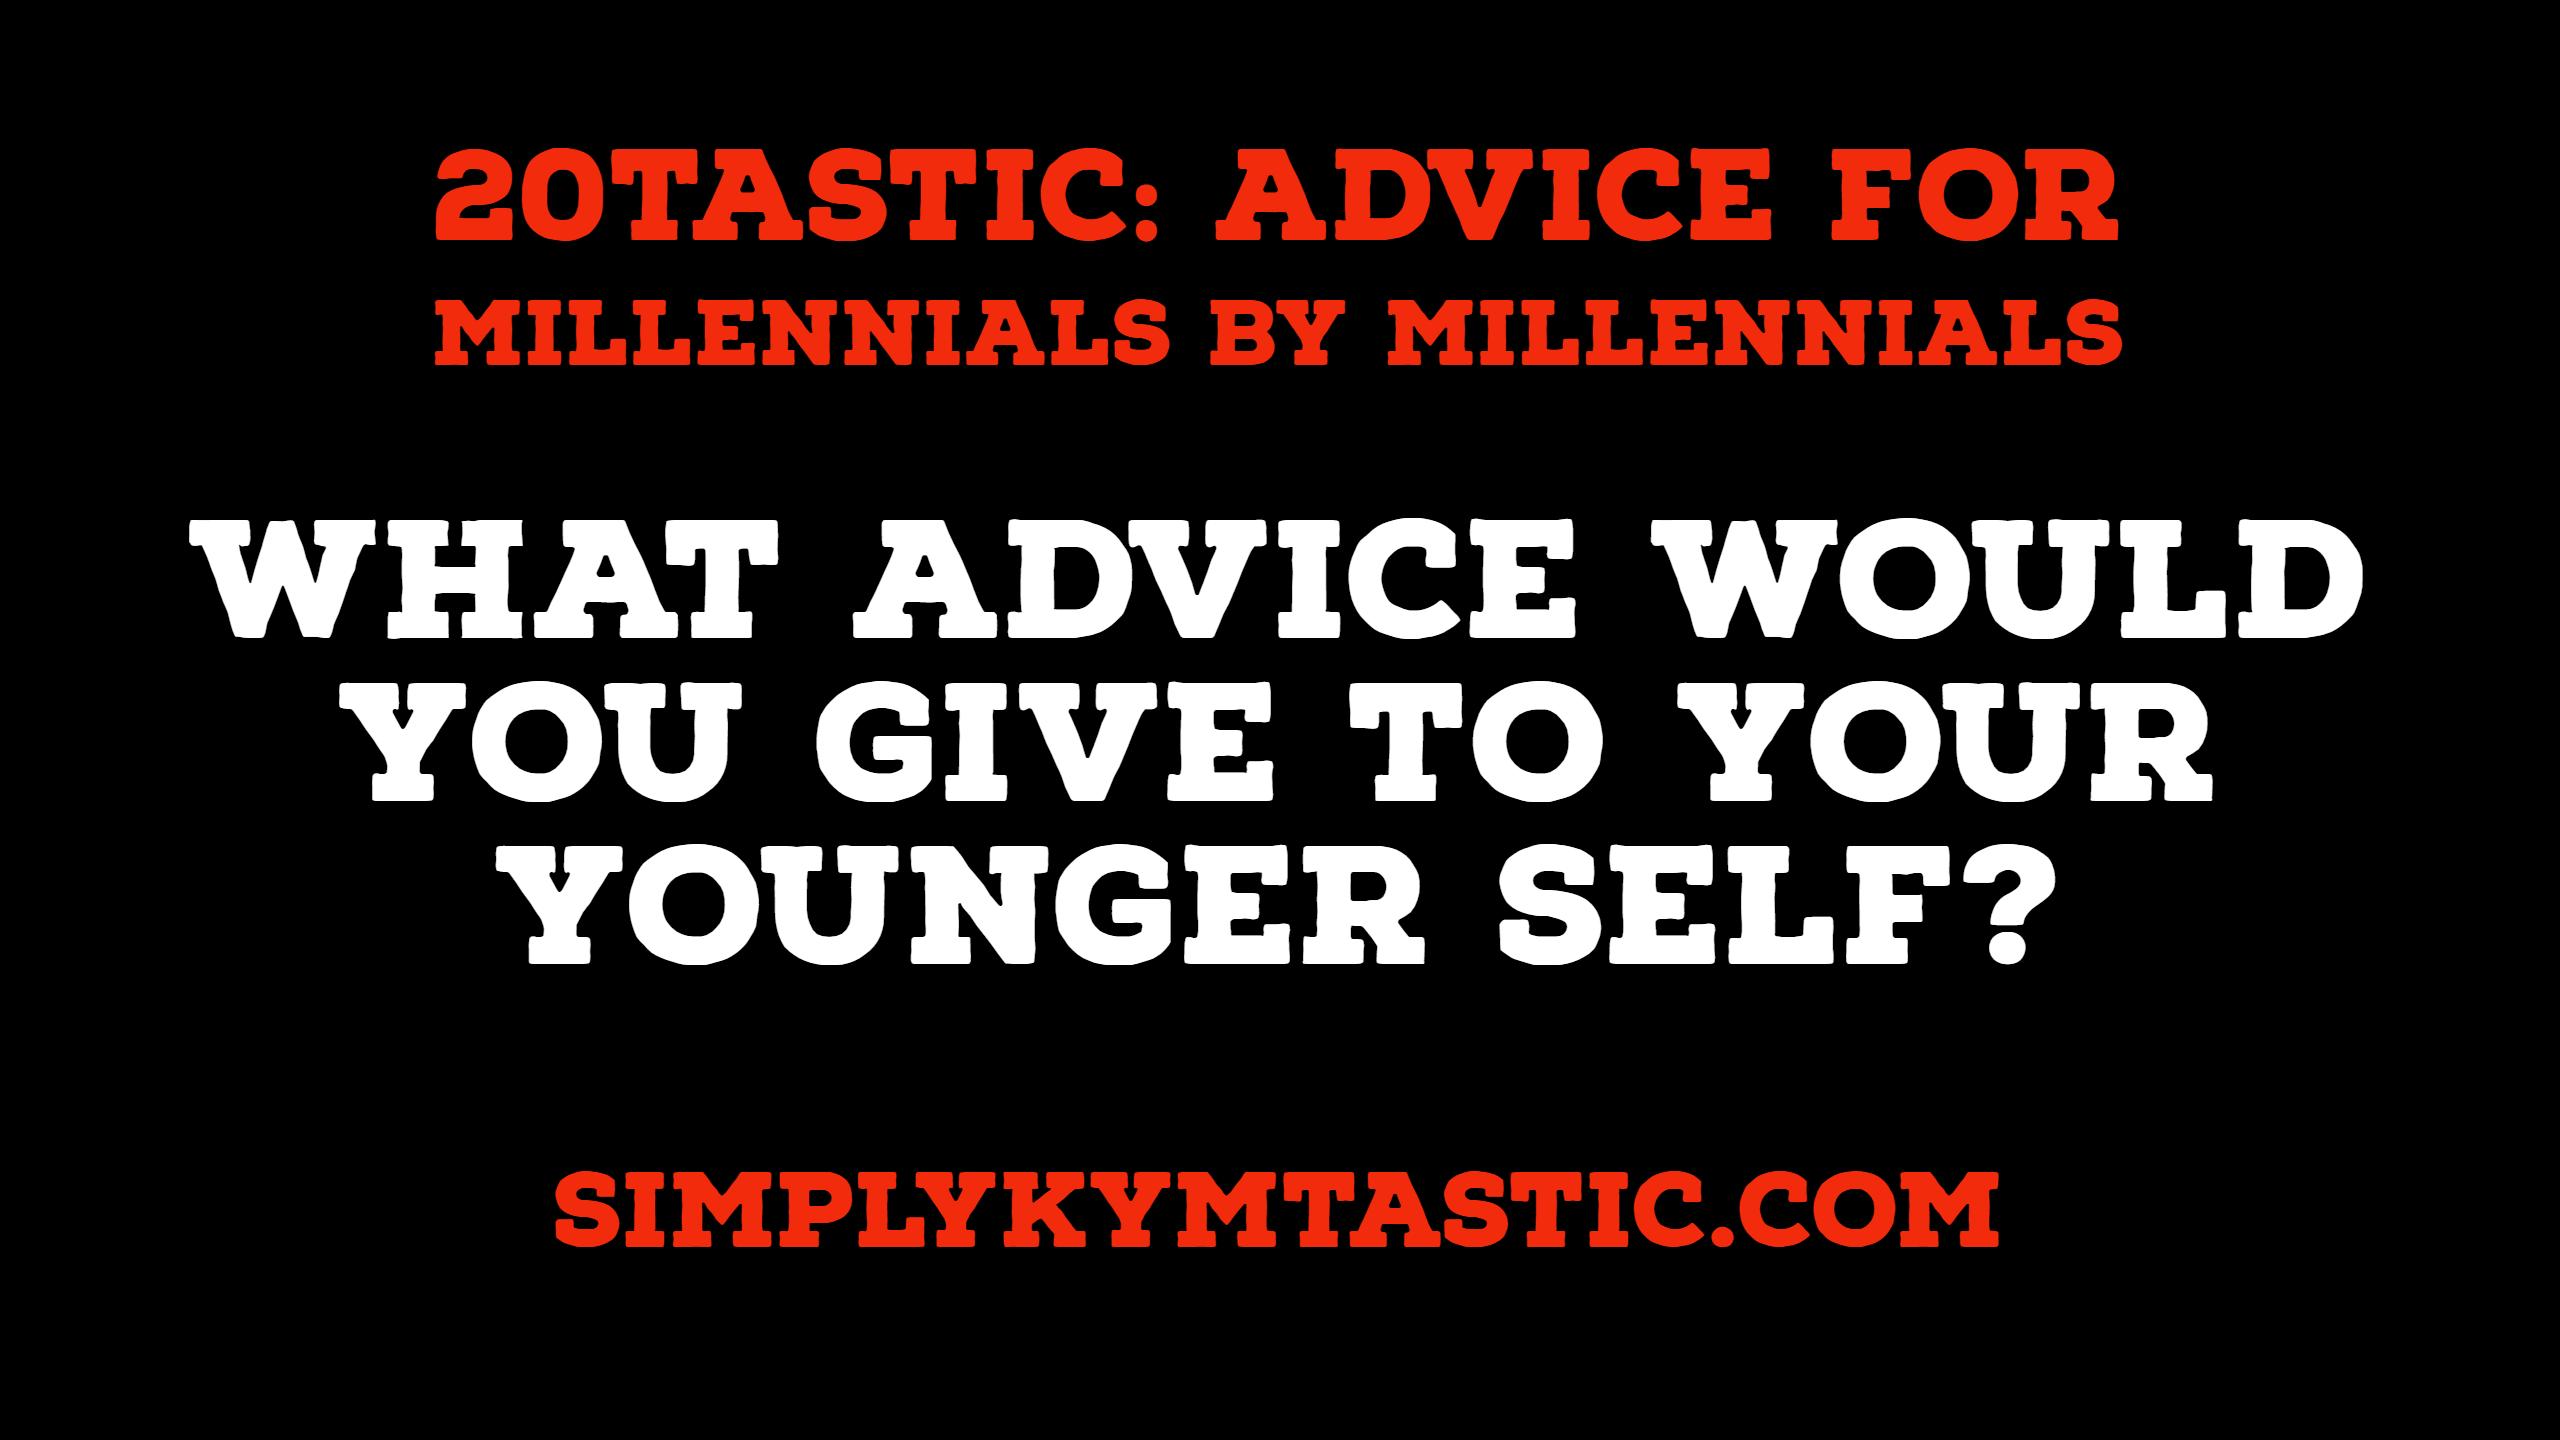 Advice to your younger self